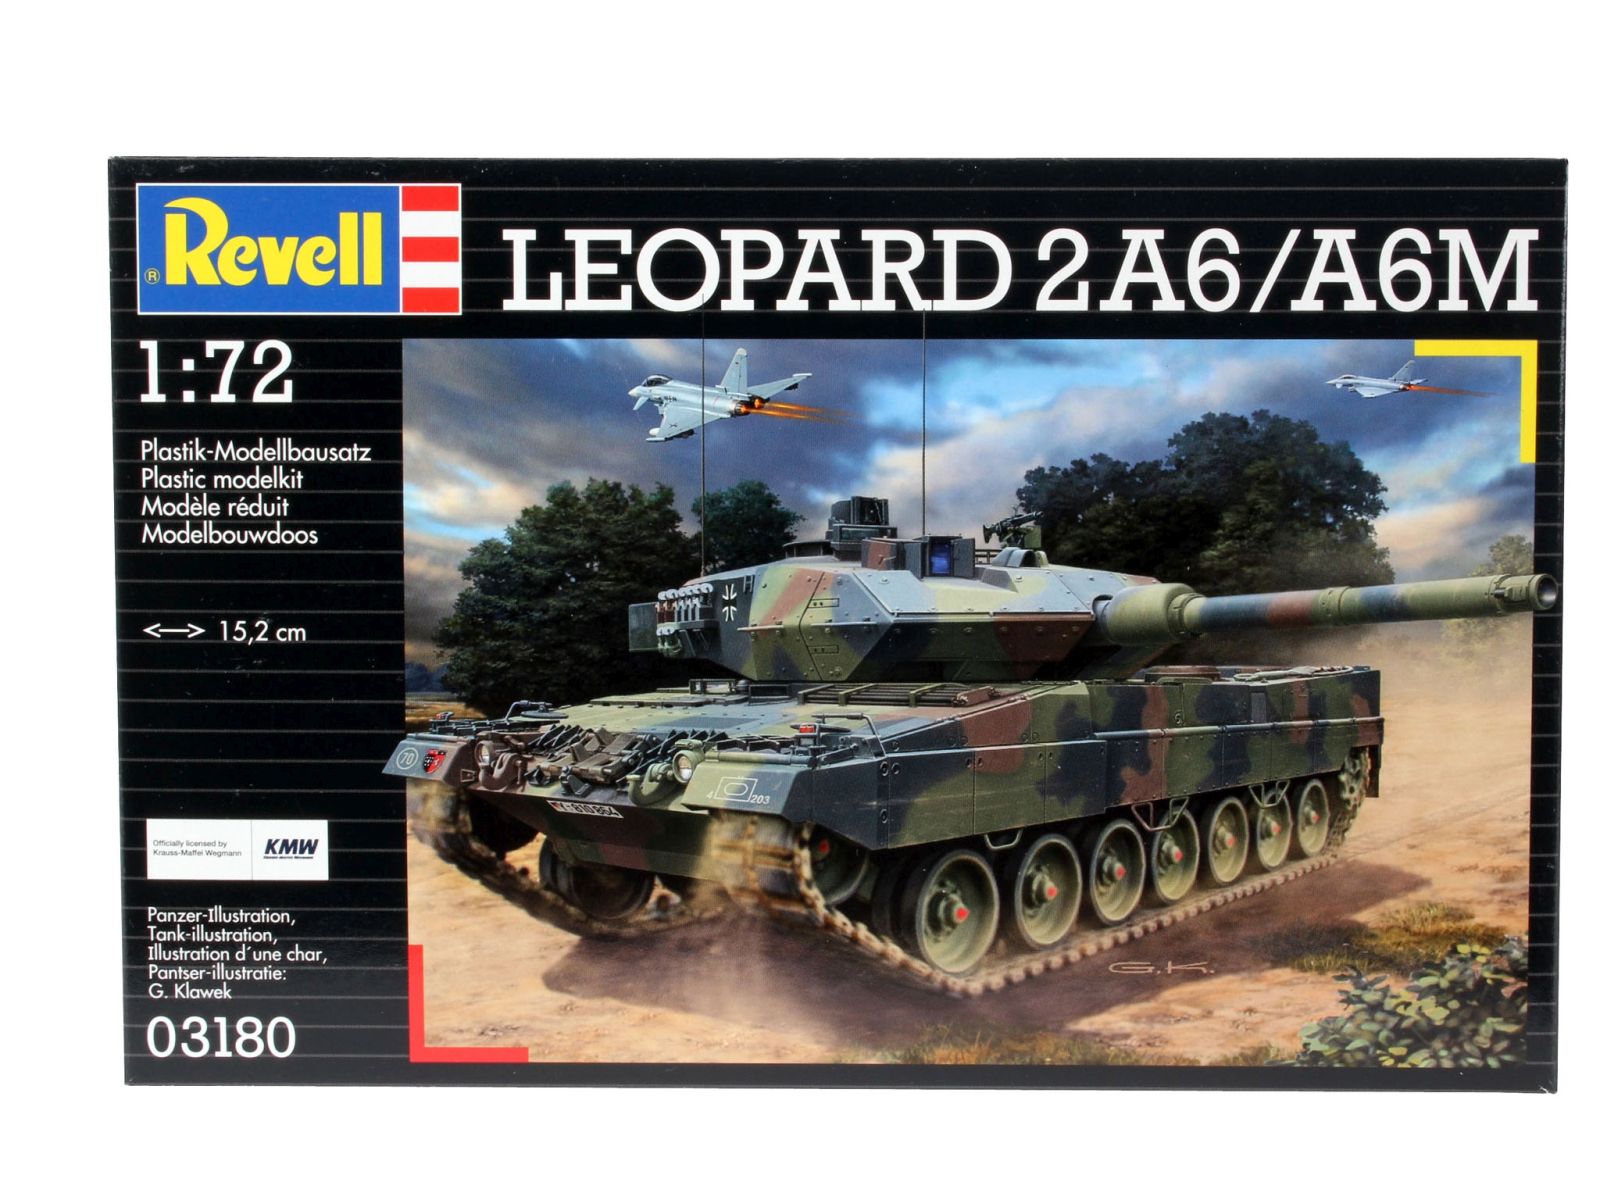 Revell 03180 - Leopard 2 A6/A6M